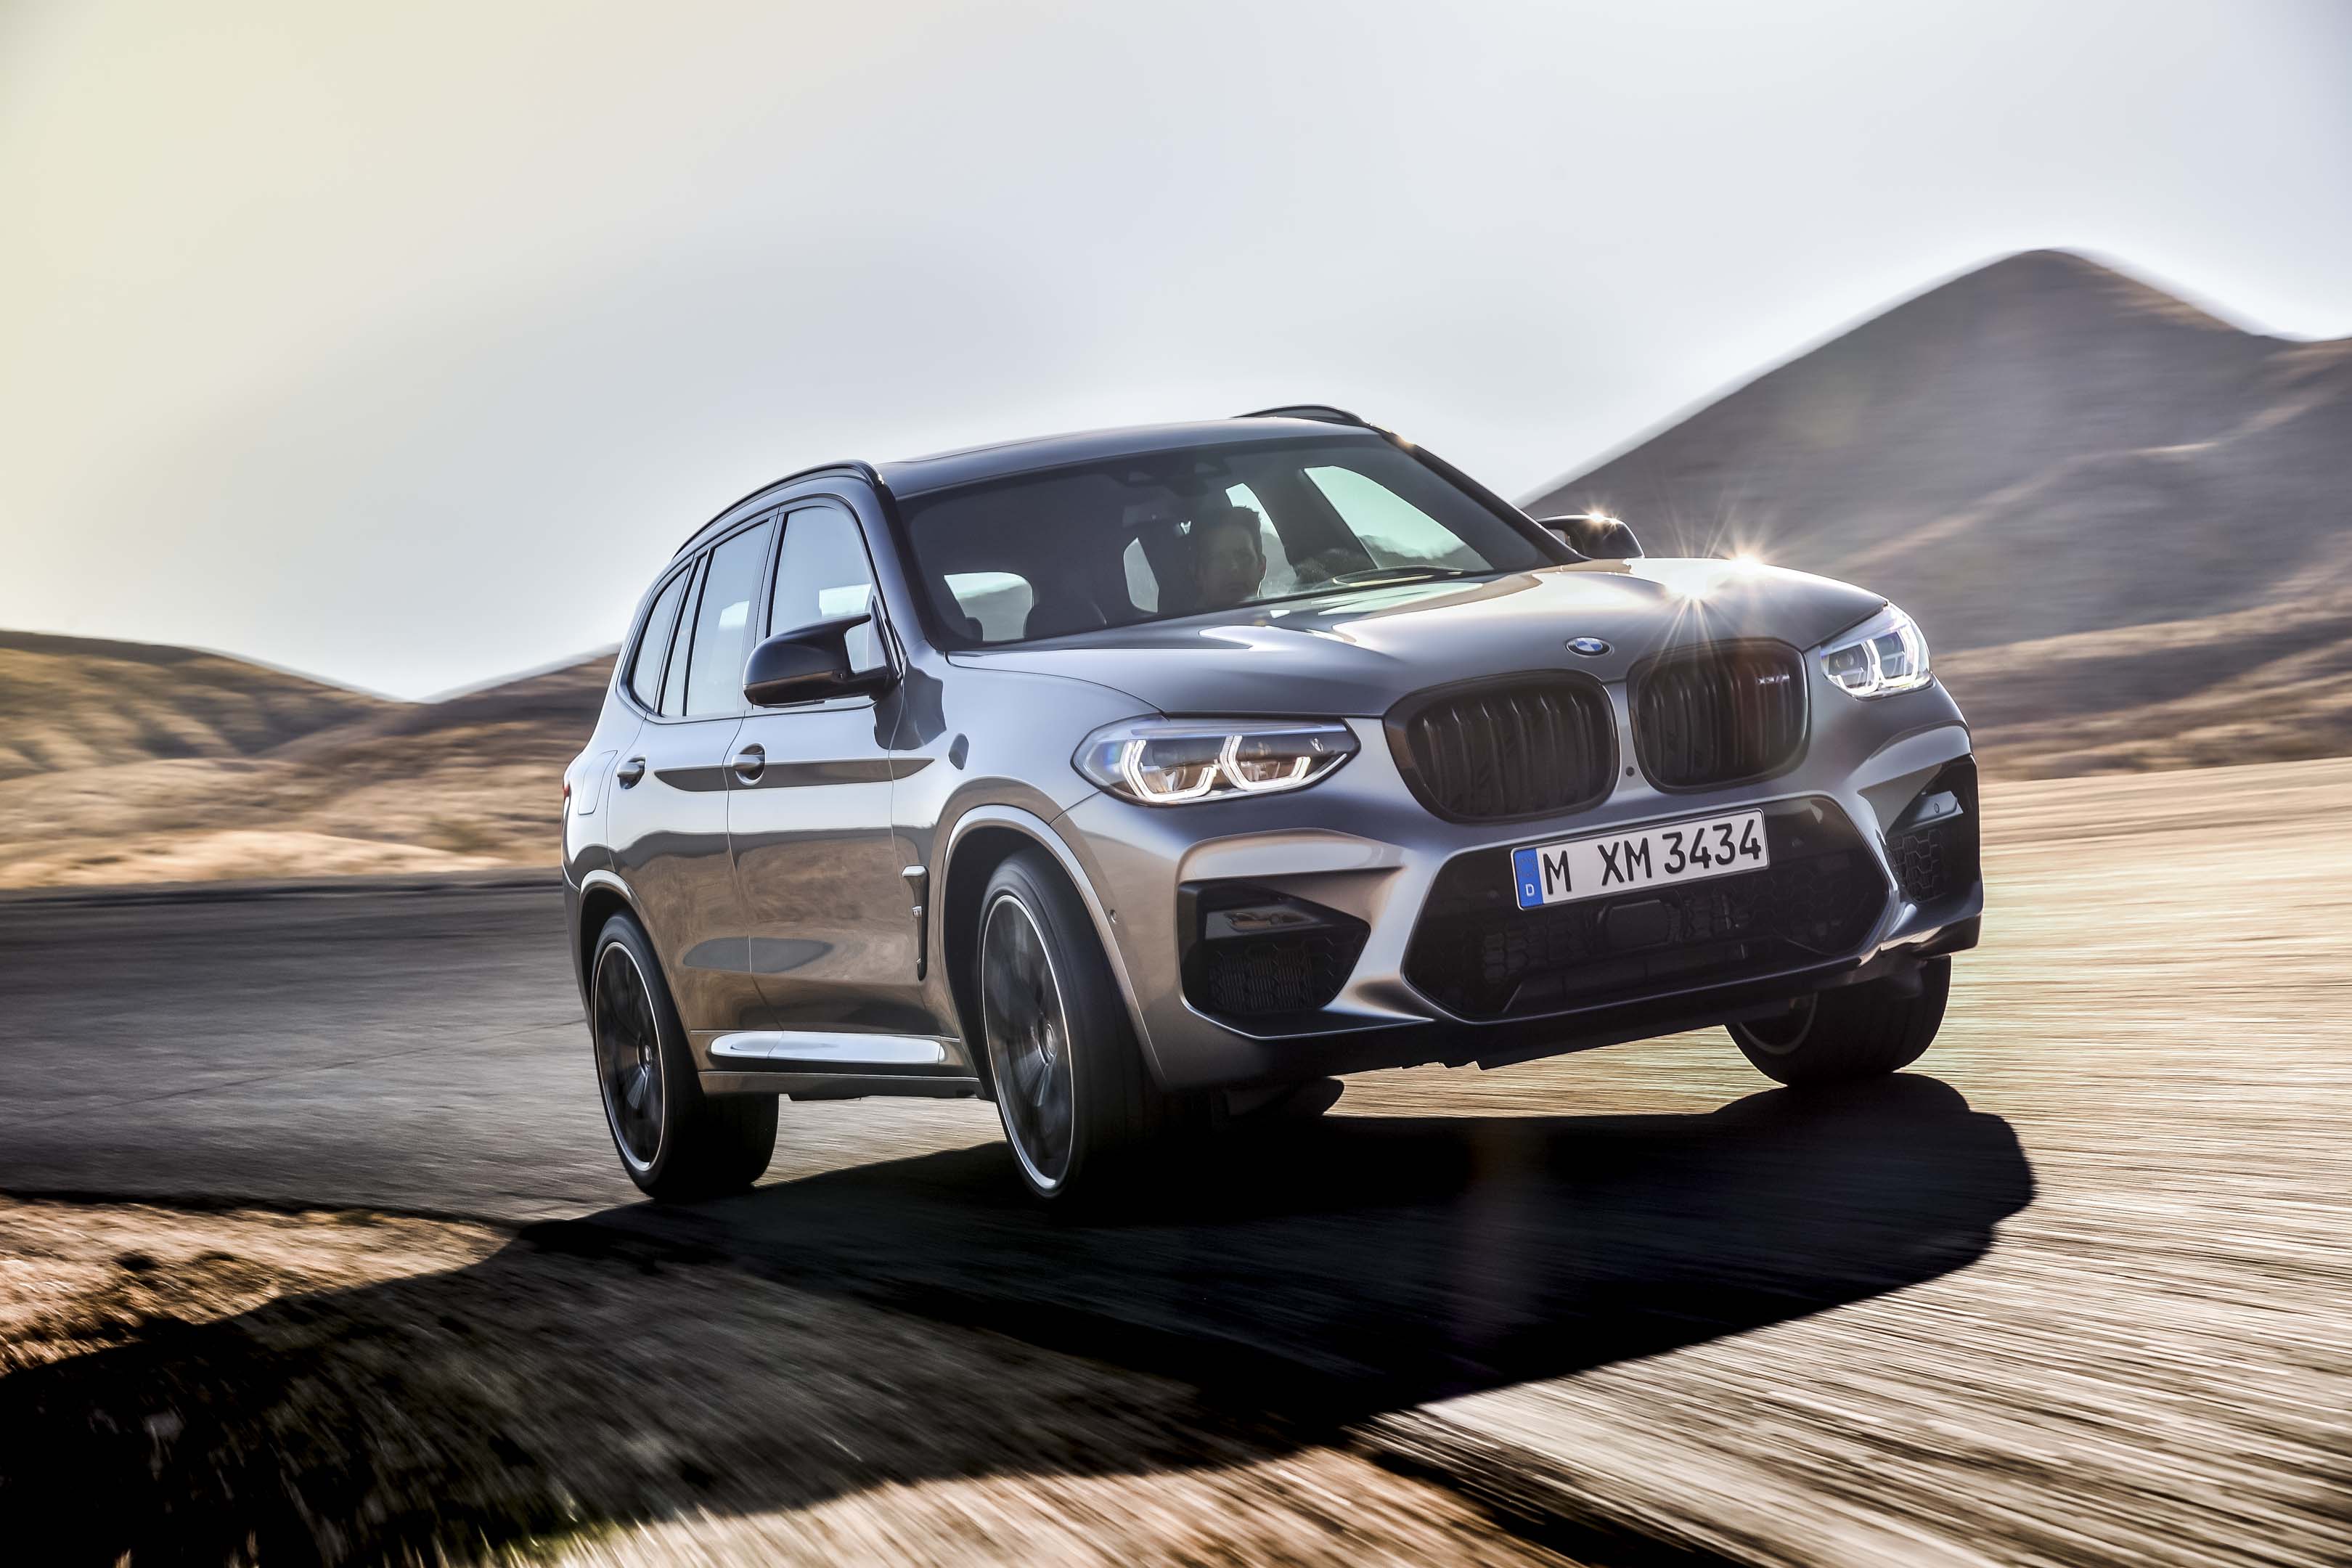 BMW X3 Reviews, Specs, Prices, Photo And Videos